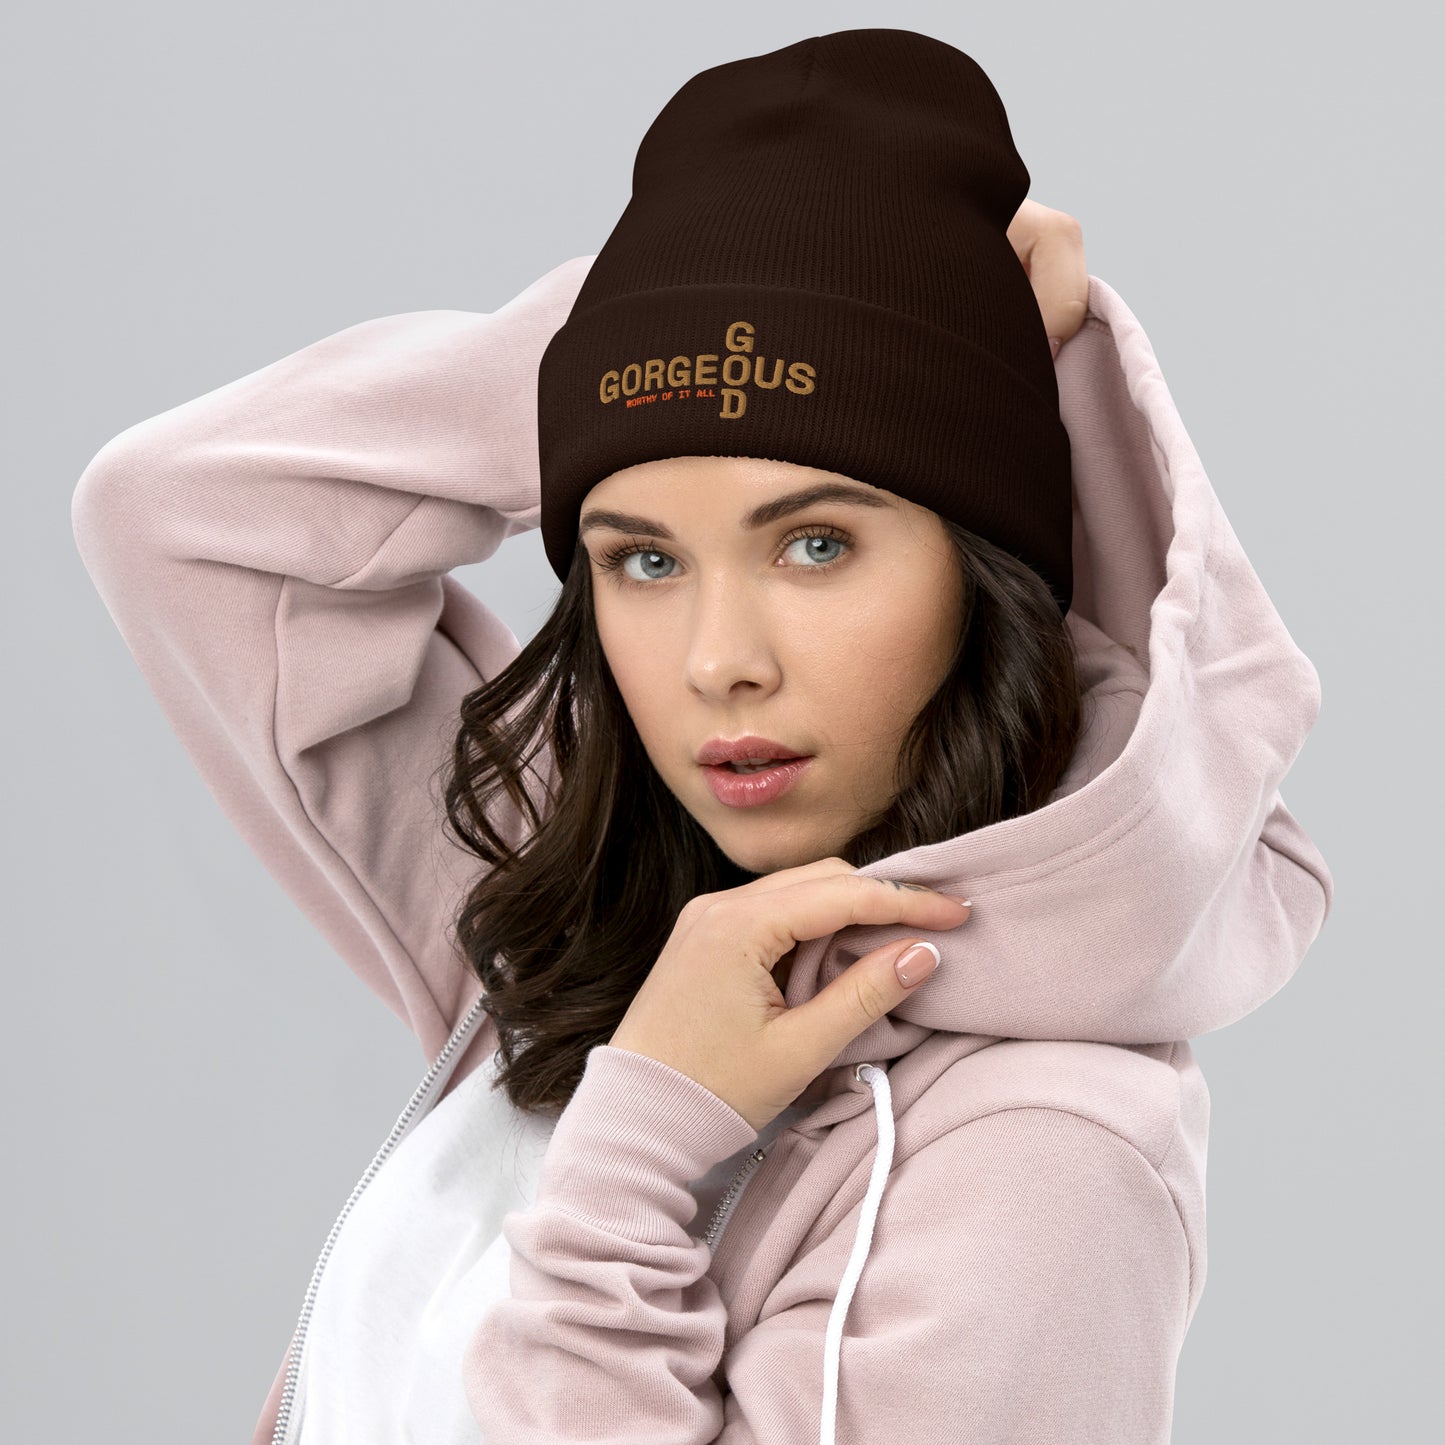 gorGEOus Worthy Of It All Beanie